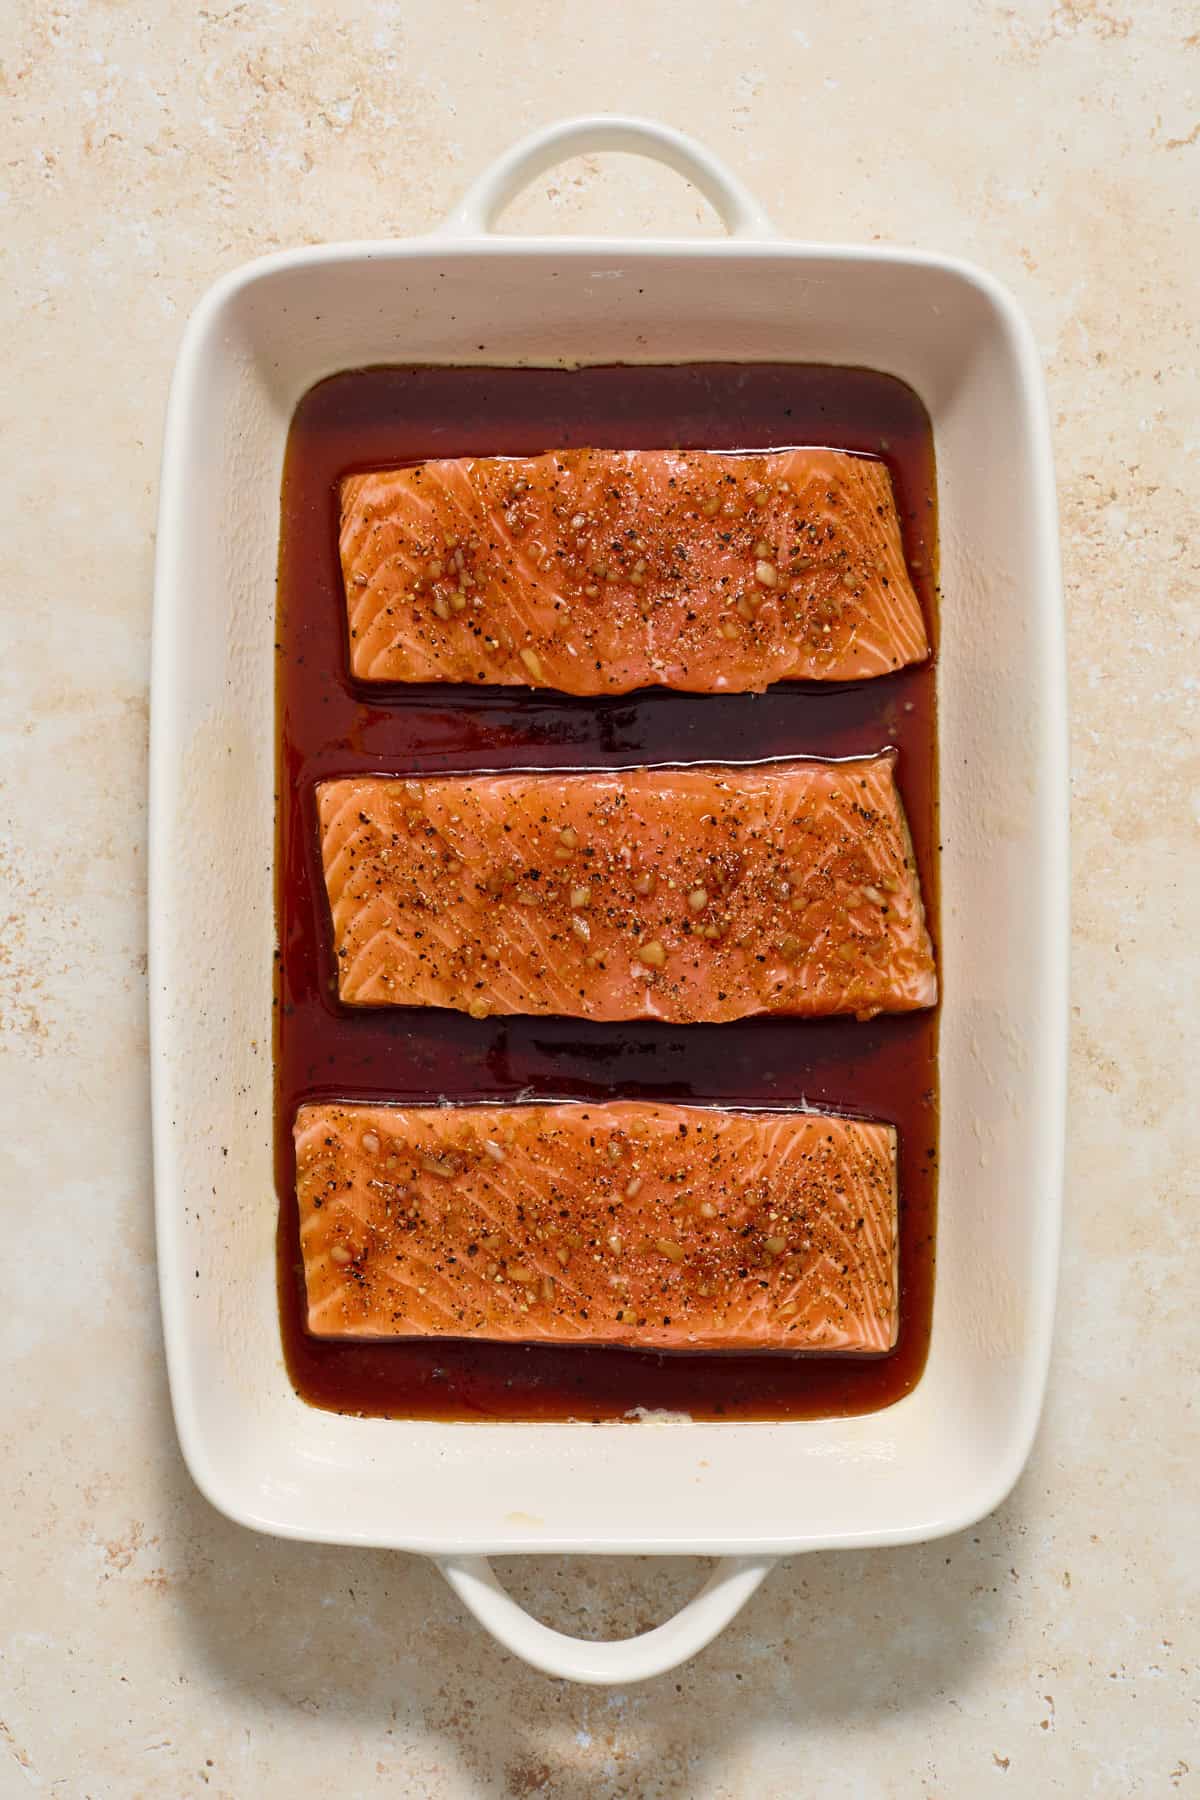 Salmon topped with maple glaze in baking pan.